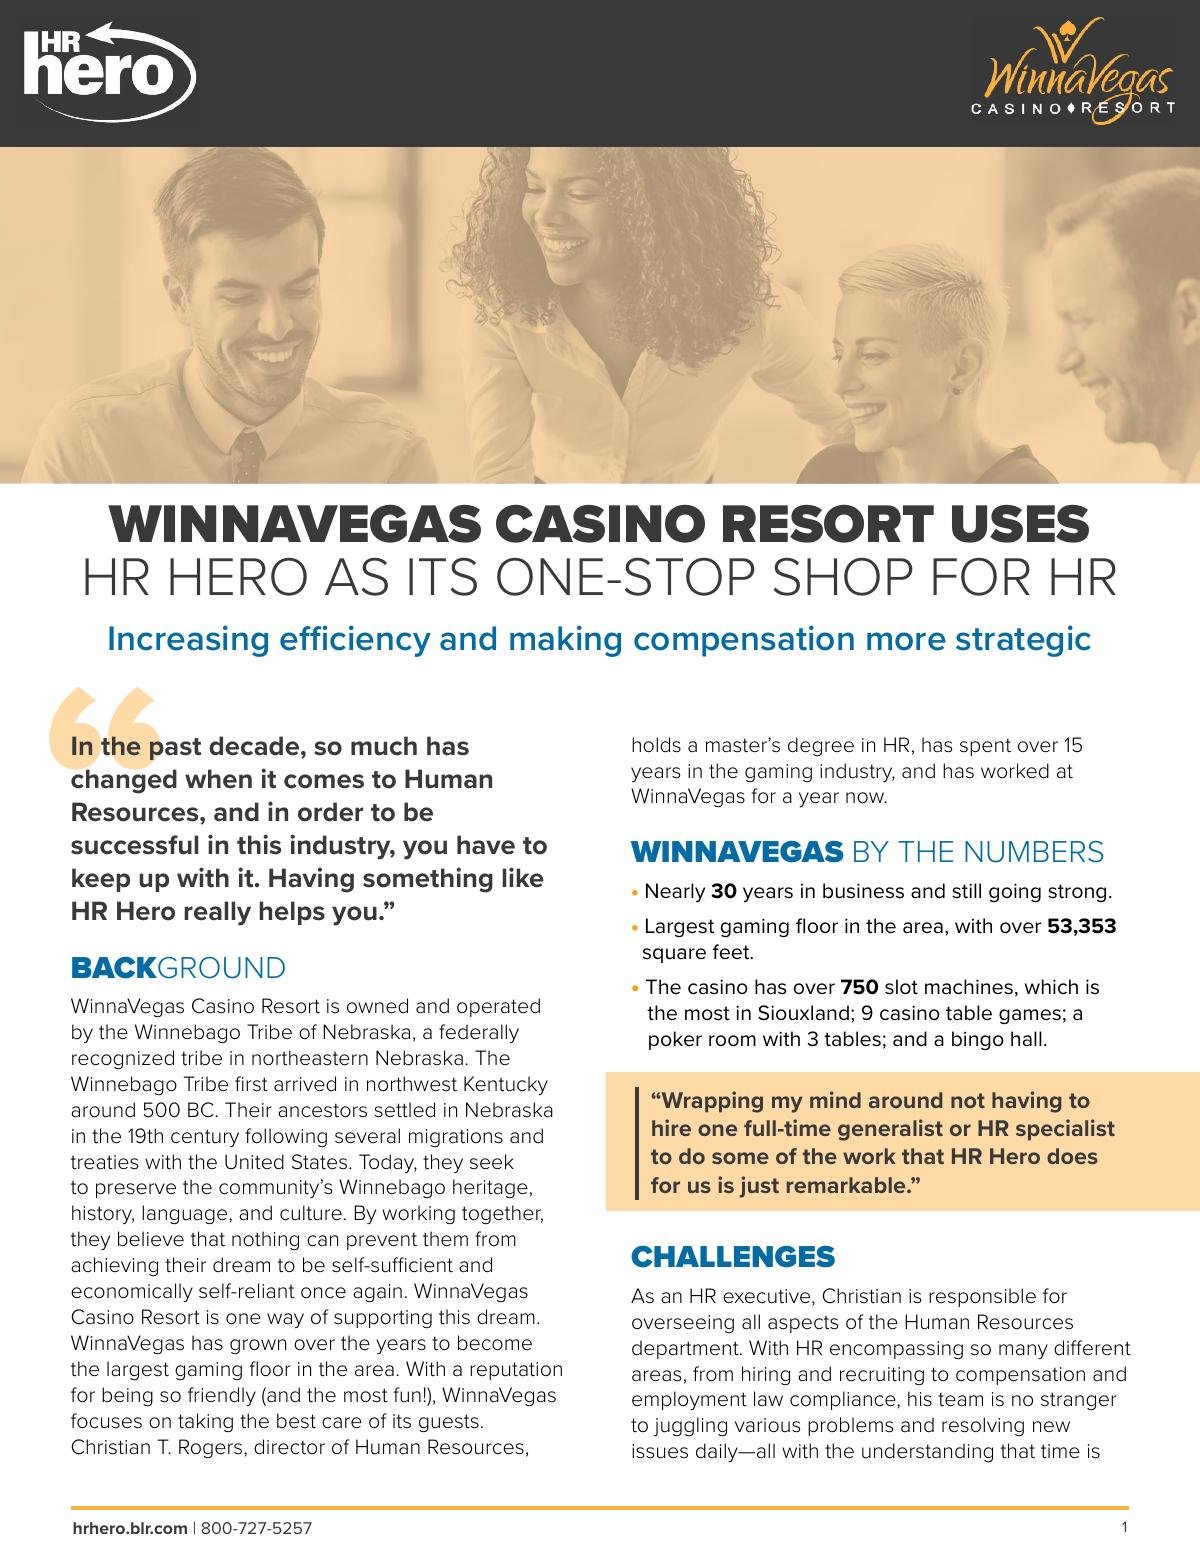 Increasing efficiency and making compensation more strategic: an HR Hero client success story